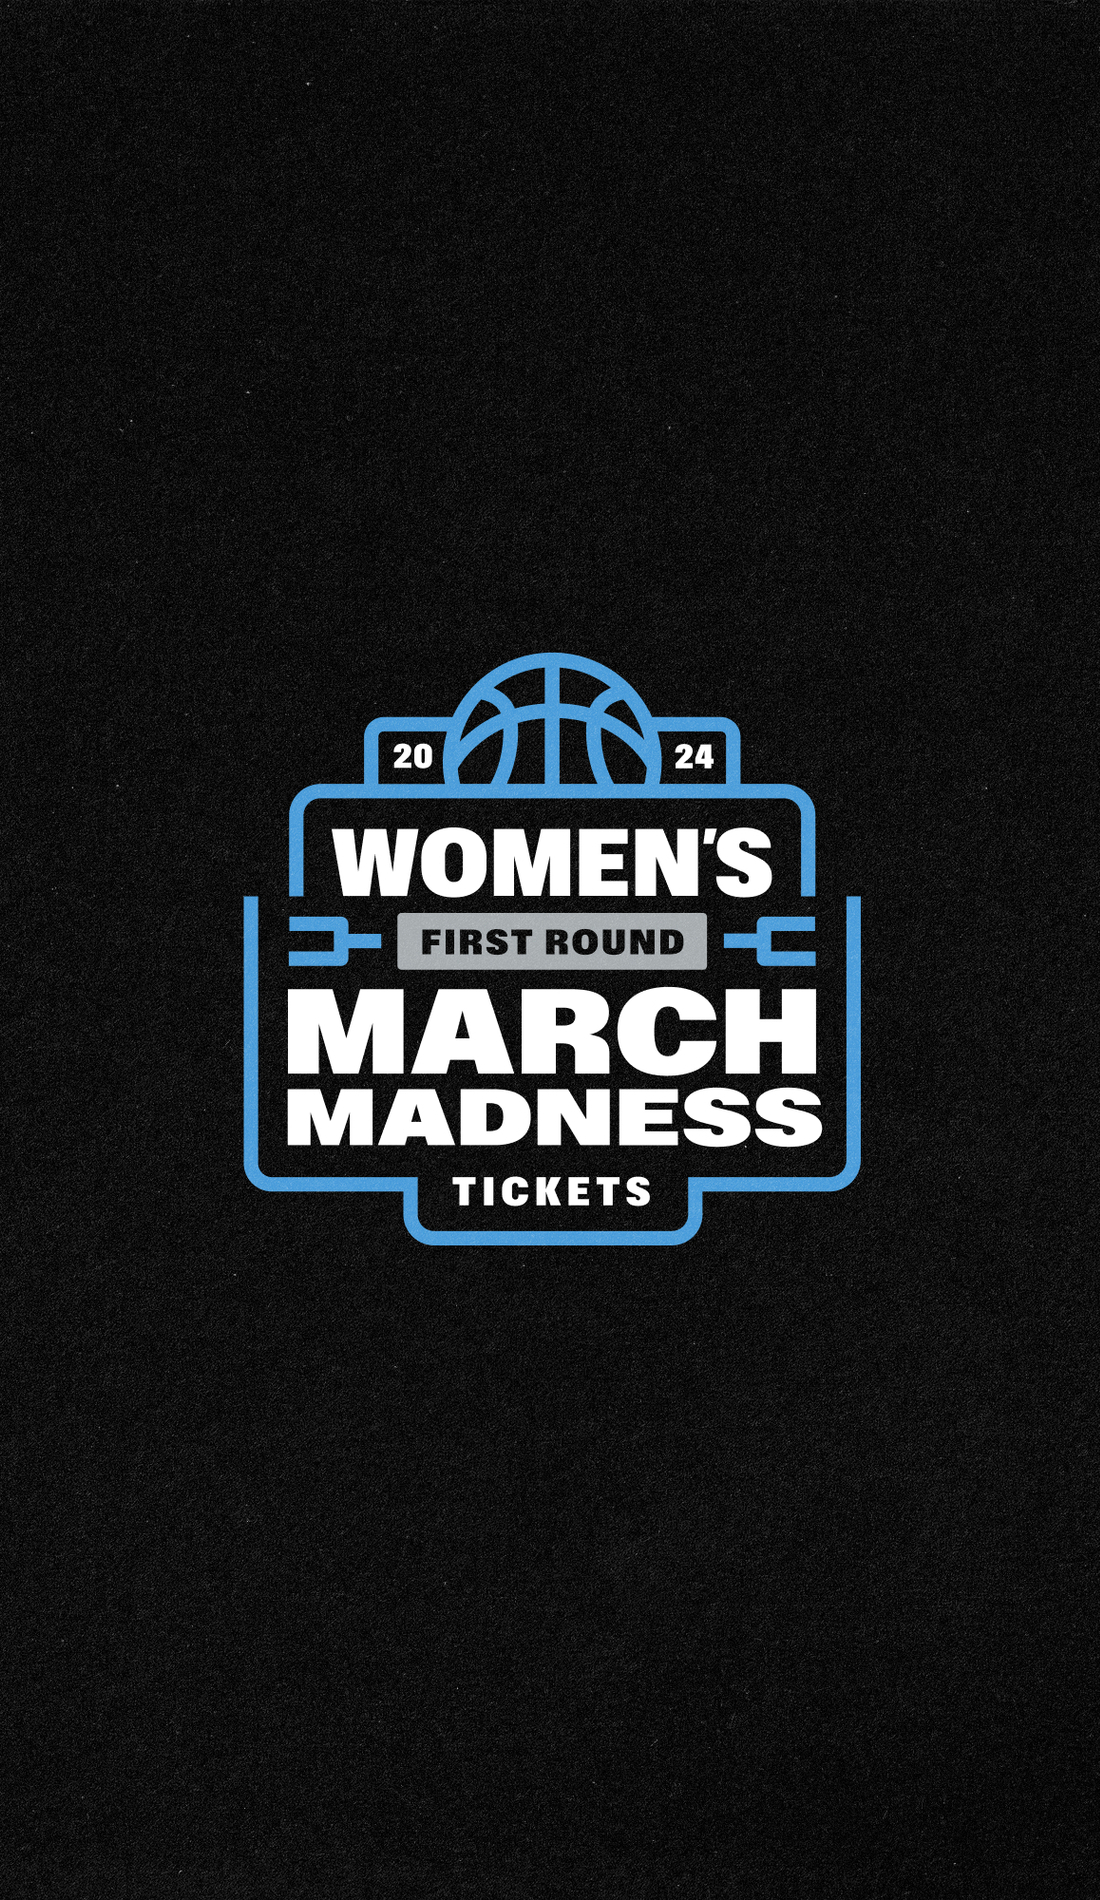 A NCAA Women's Tournament First and Second Rounds live event